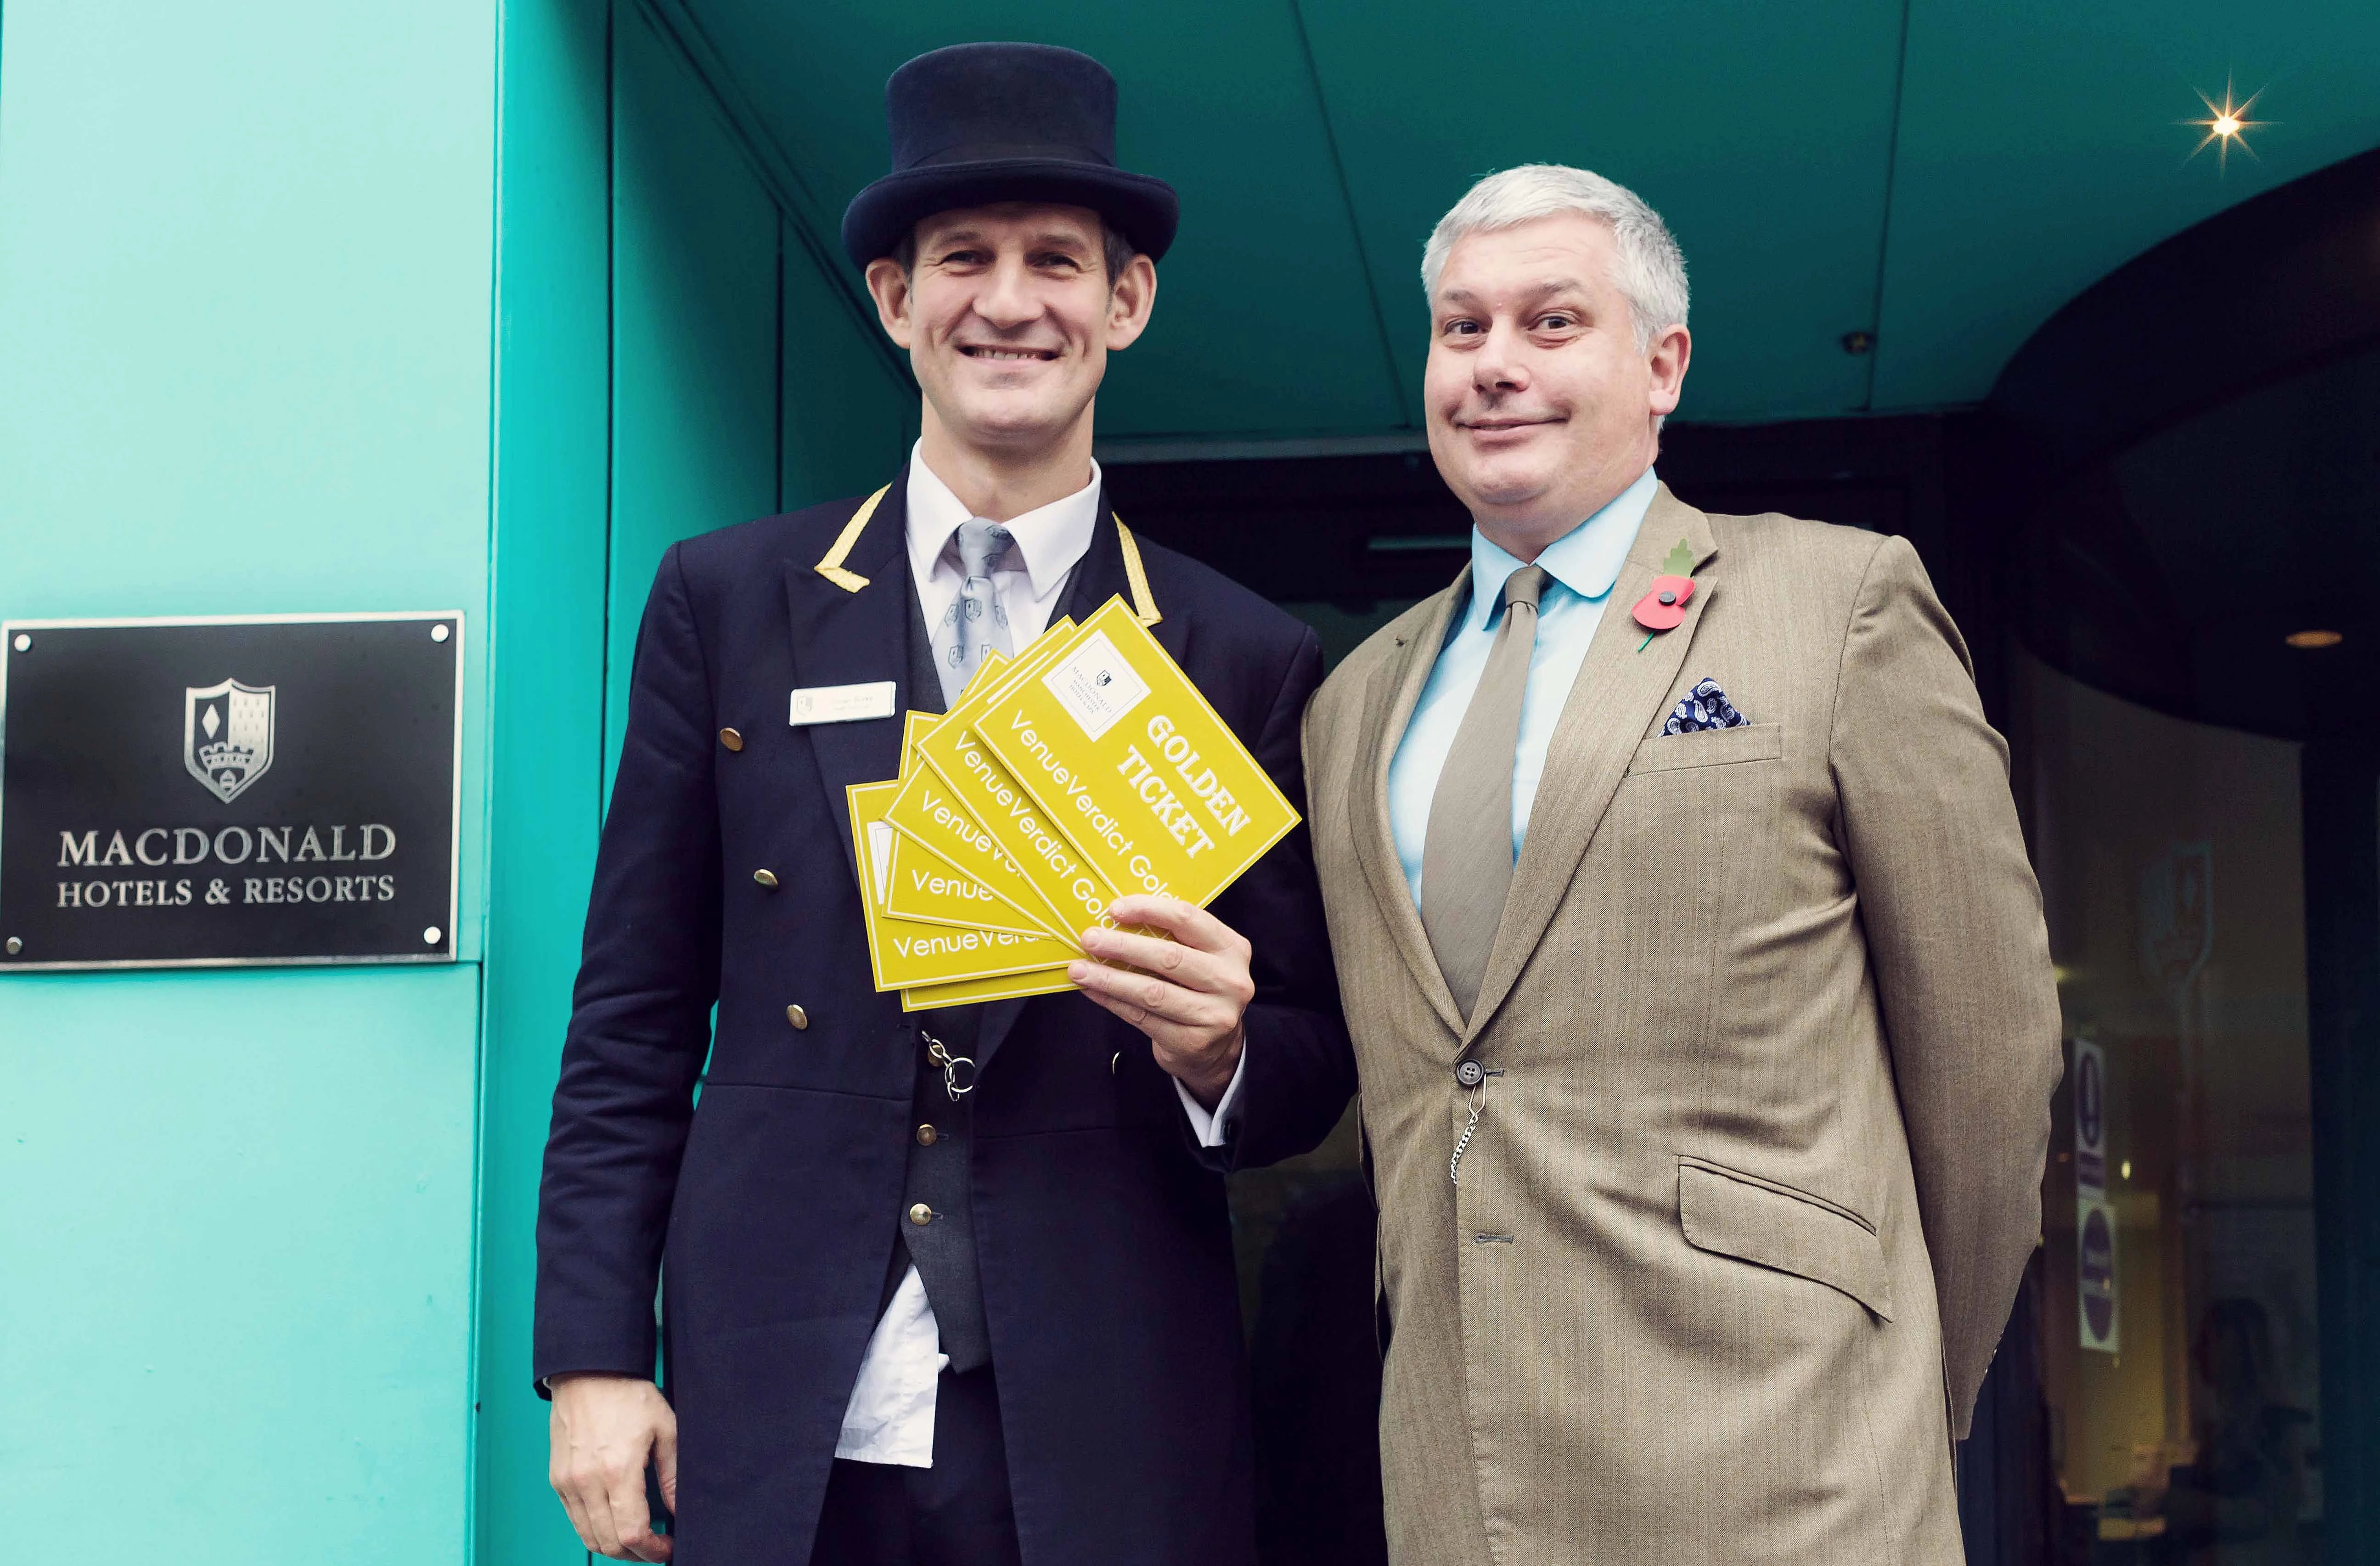 Head doorman Conan Burke with General Manager Paul Bayliss